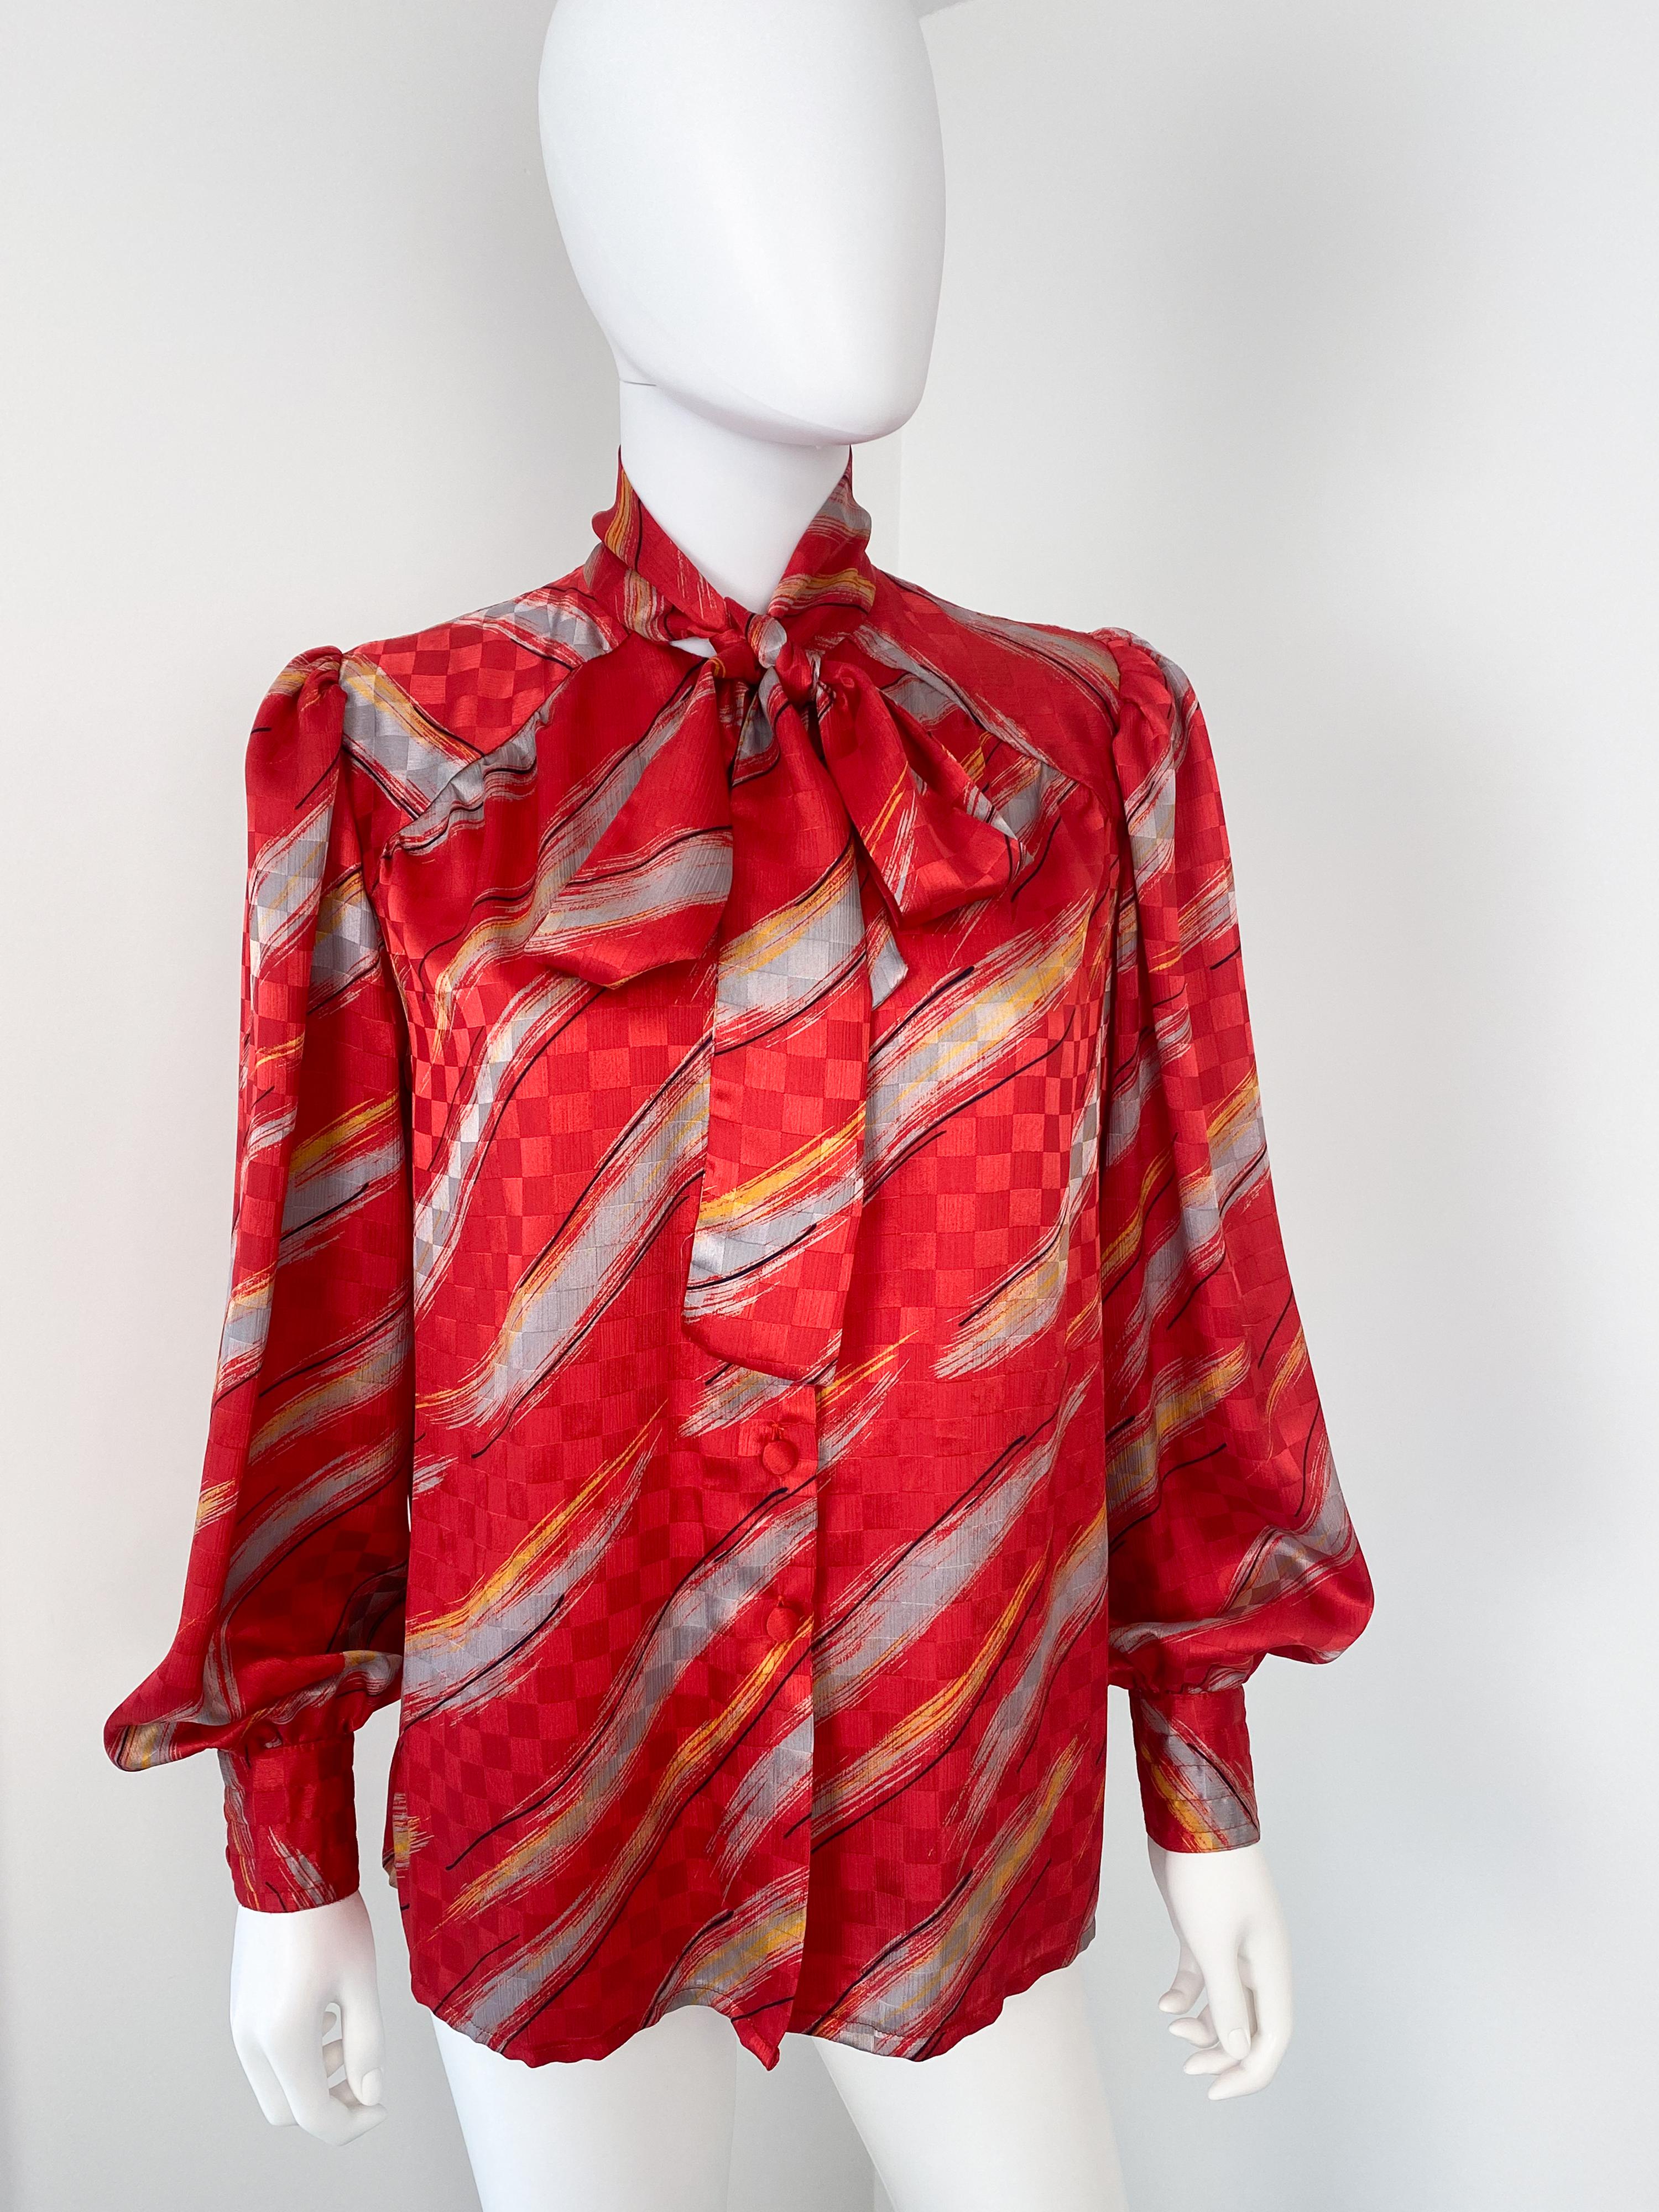 Wonderful vintage 1980s silky polyester pussy bow blouse with attached bow-scarf. Bright red colors fabric with slash pattern in gray and yellow colors with black contrast. The fabric has a shiny checkerboard textured finish. 
There is ample